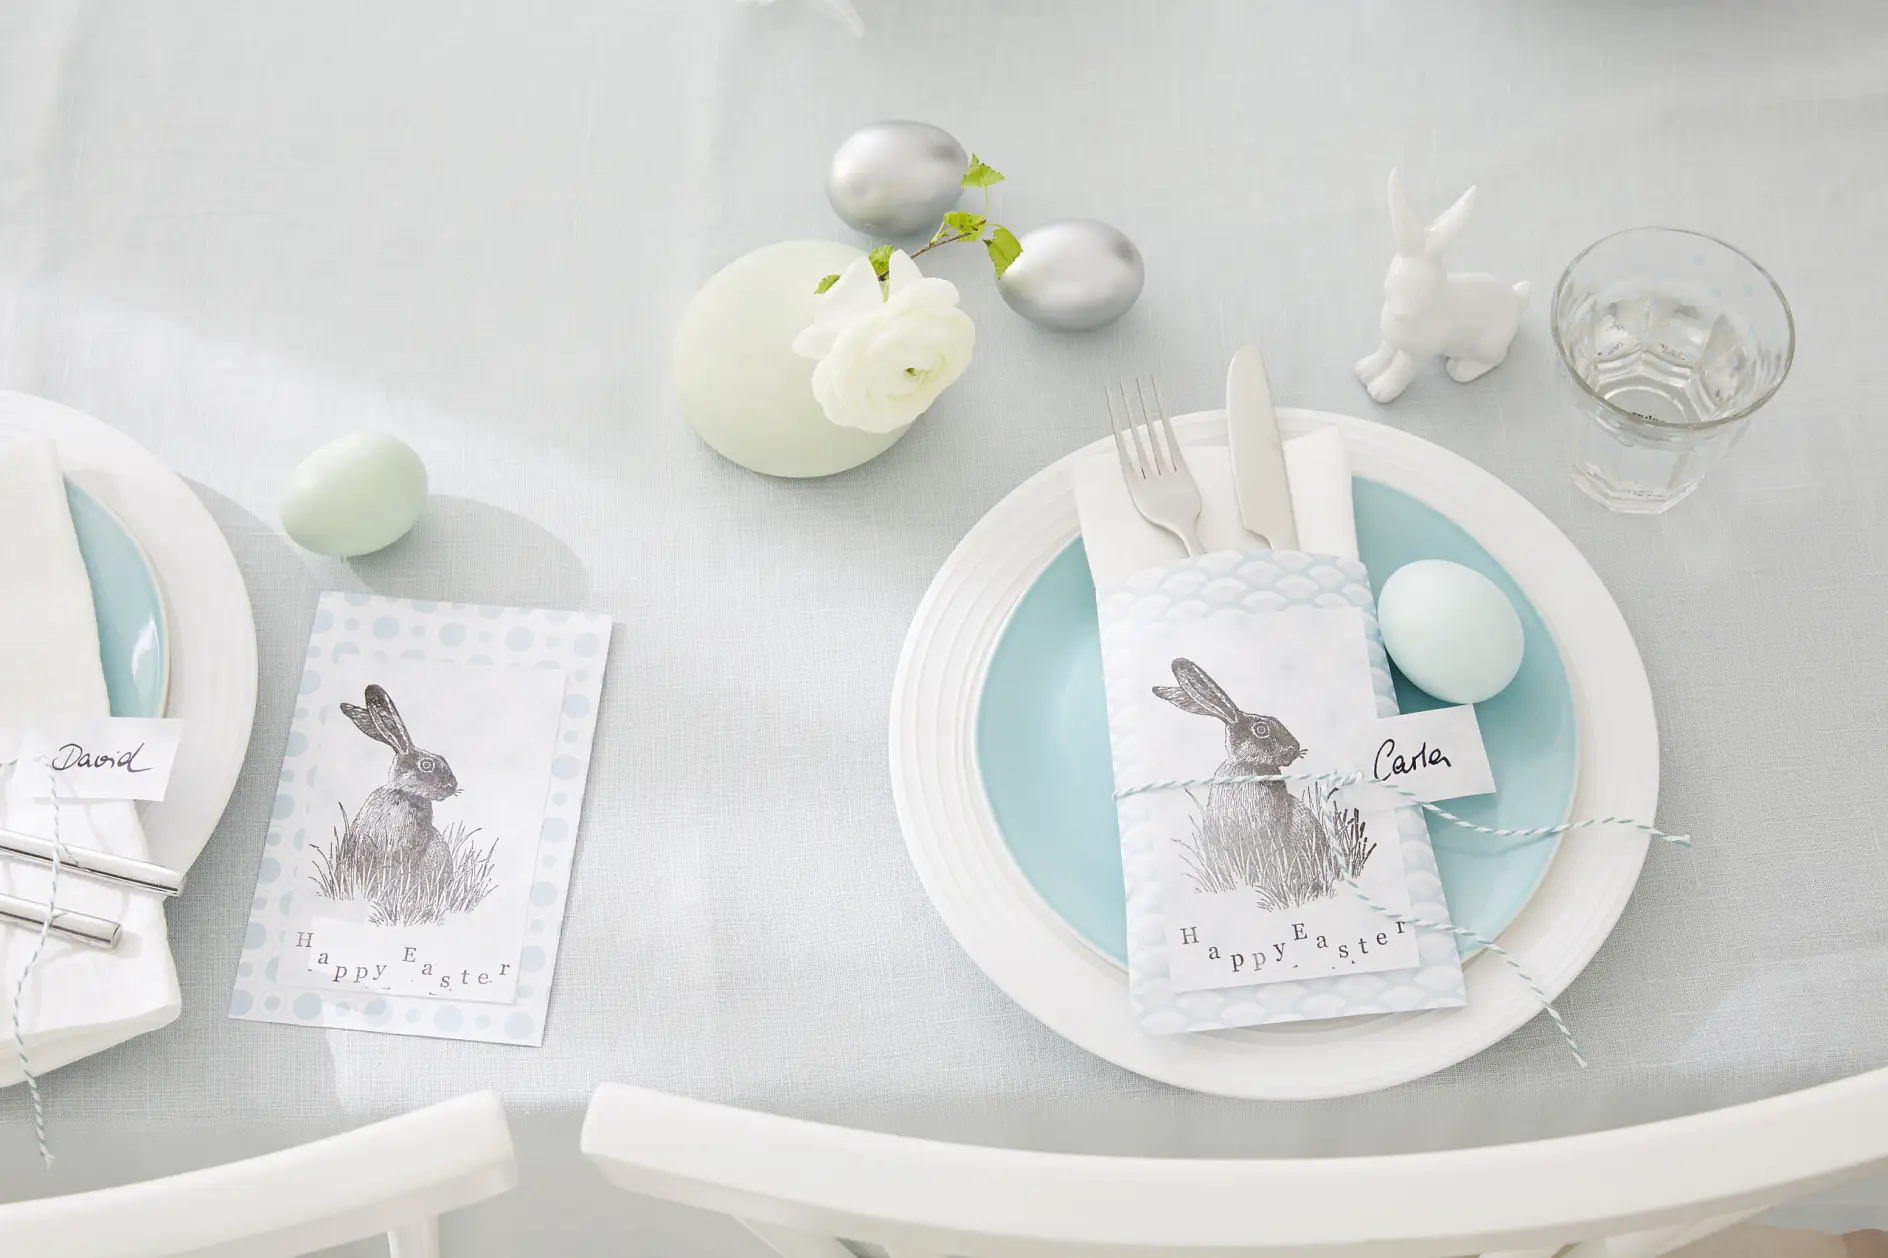 With plenty of charm, they - literally - pocket everything: These place cards also hold silverware and napkins. The pouch is folded and glued; the bunny is printed with a stamp.